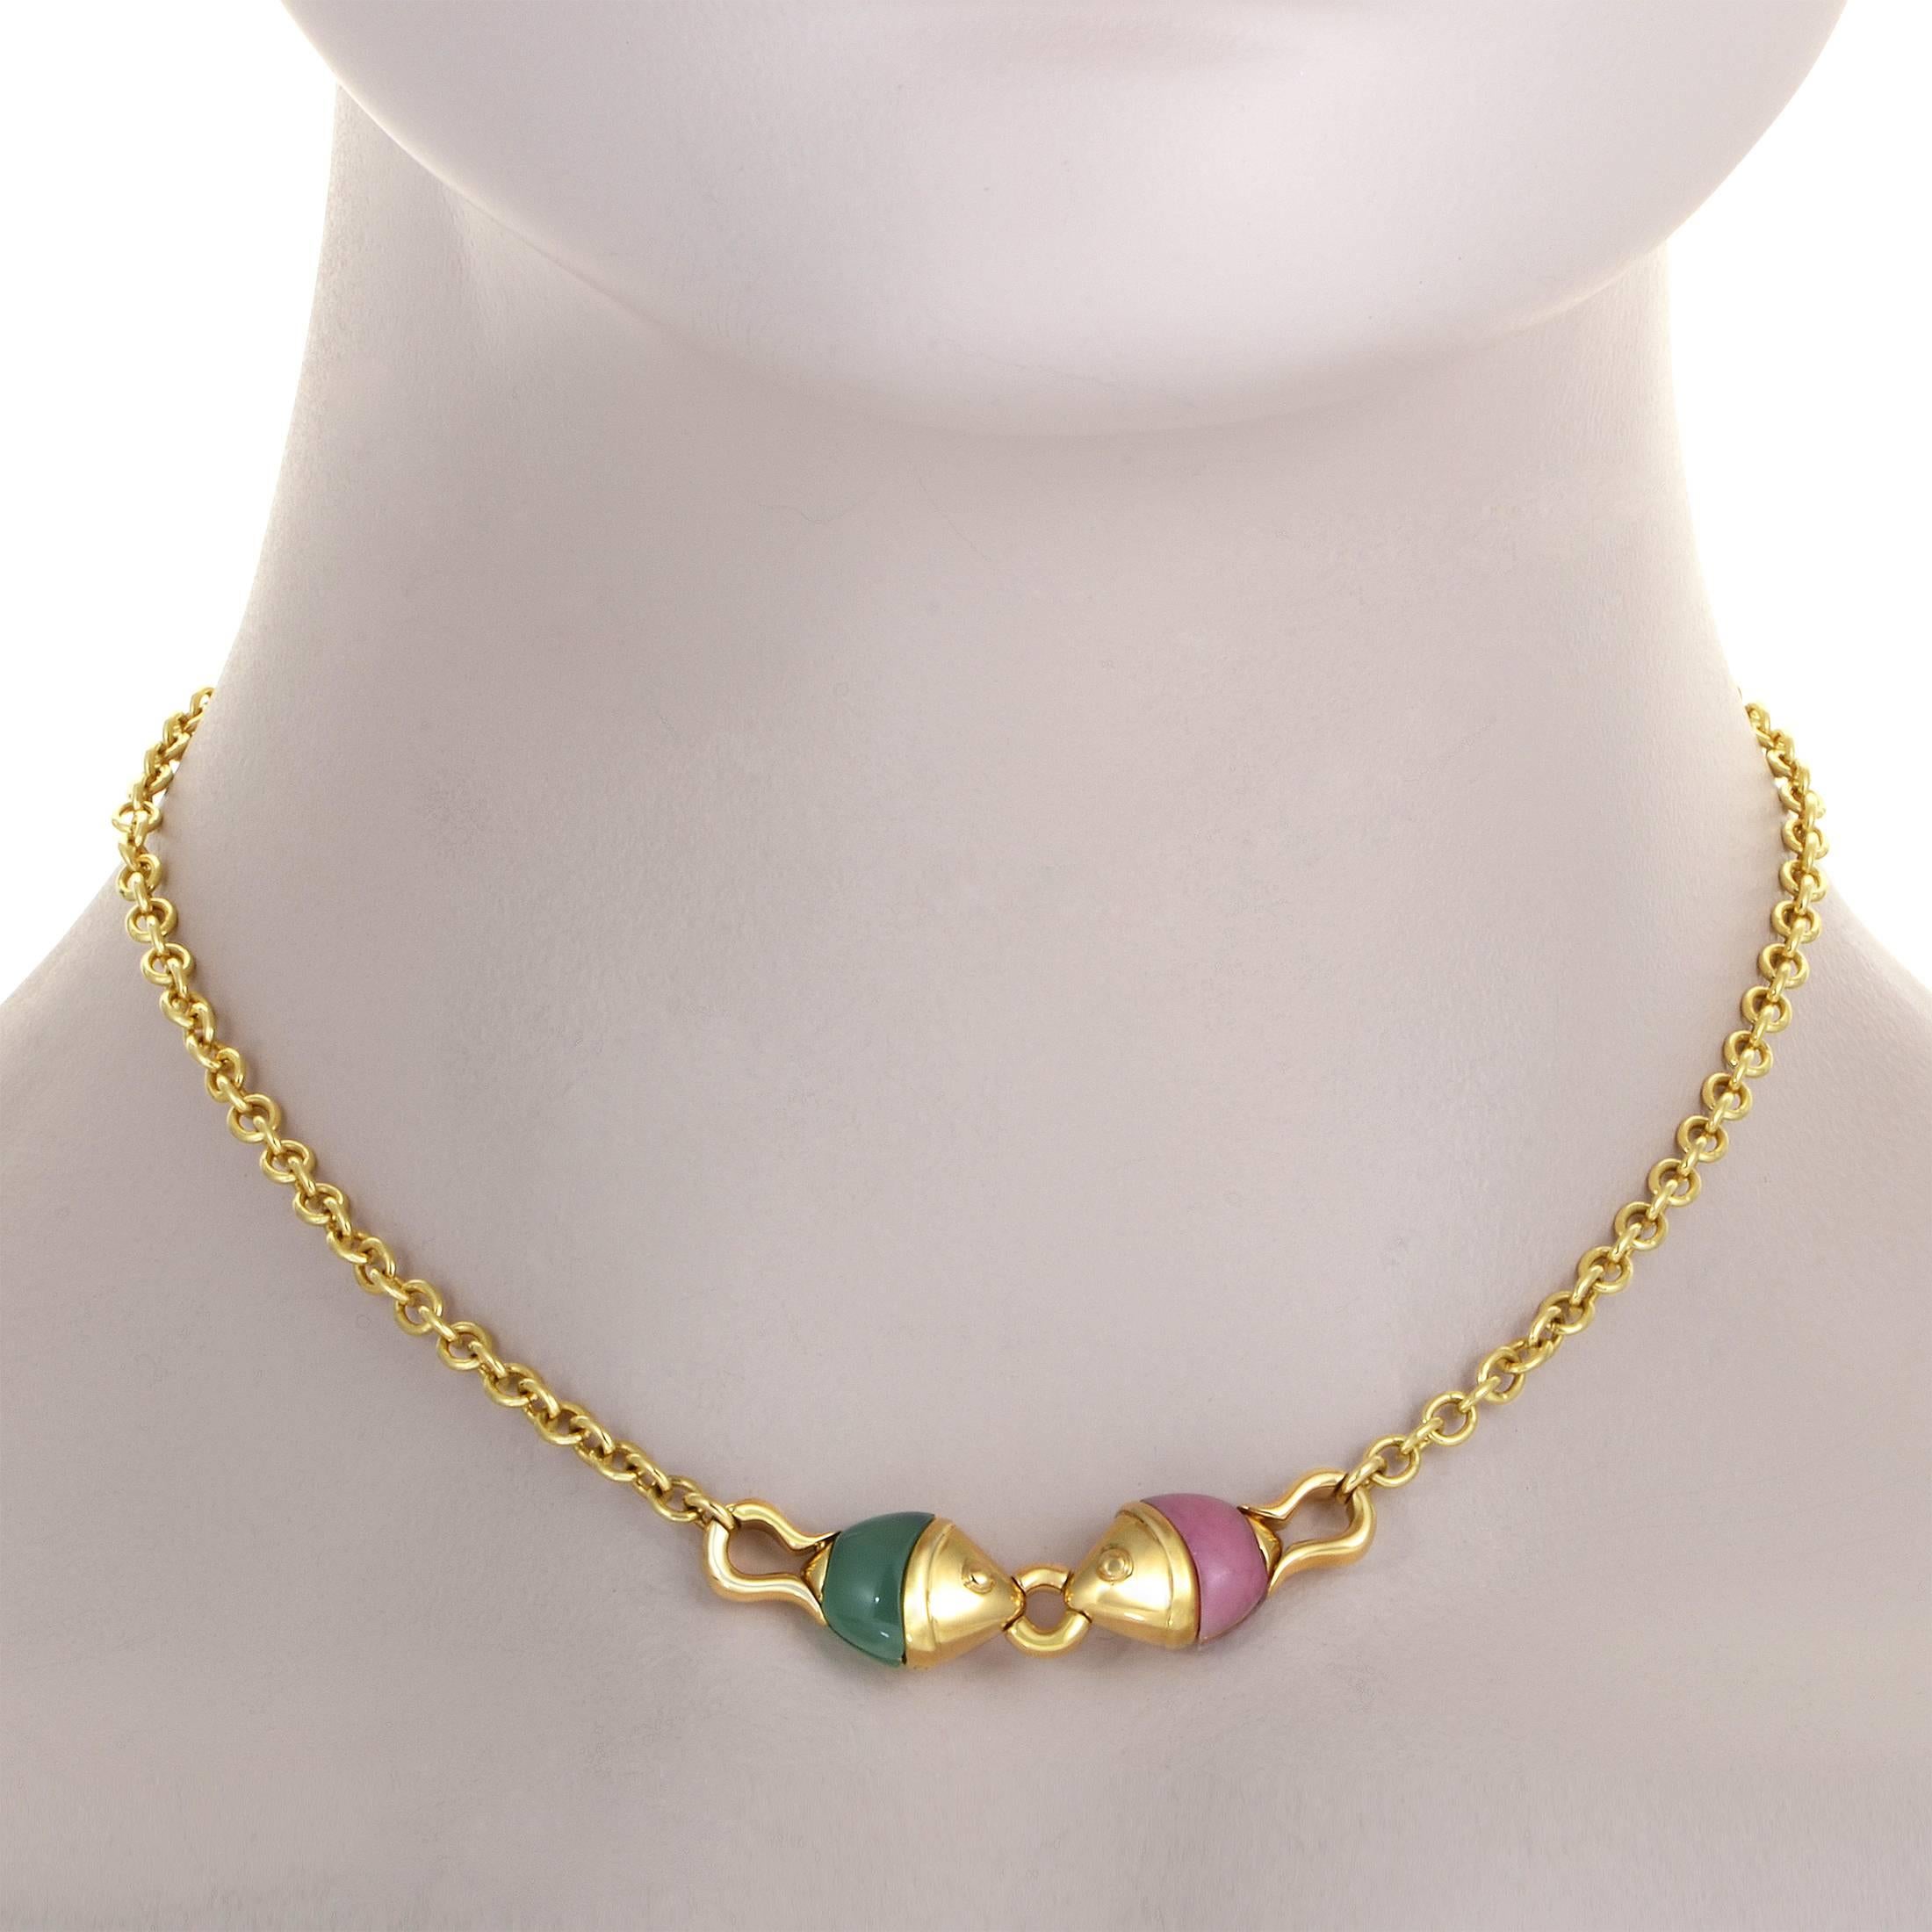 Two adorable shapes reminiscent of tiny fish are joined at the middle of this marvelous 18K yellow gold necklace from Bulgari, one embellished with a lovely pink quartz and the other with a splendid green jade for a pleasant sight.
Pendant